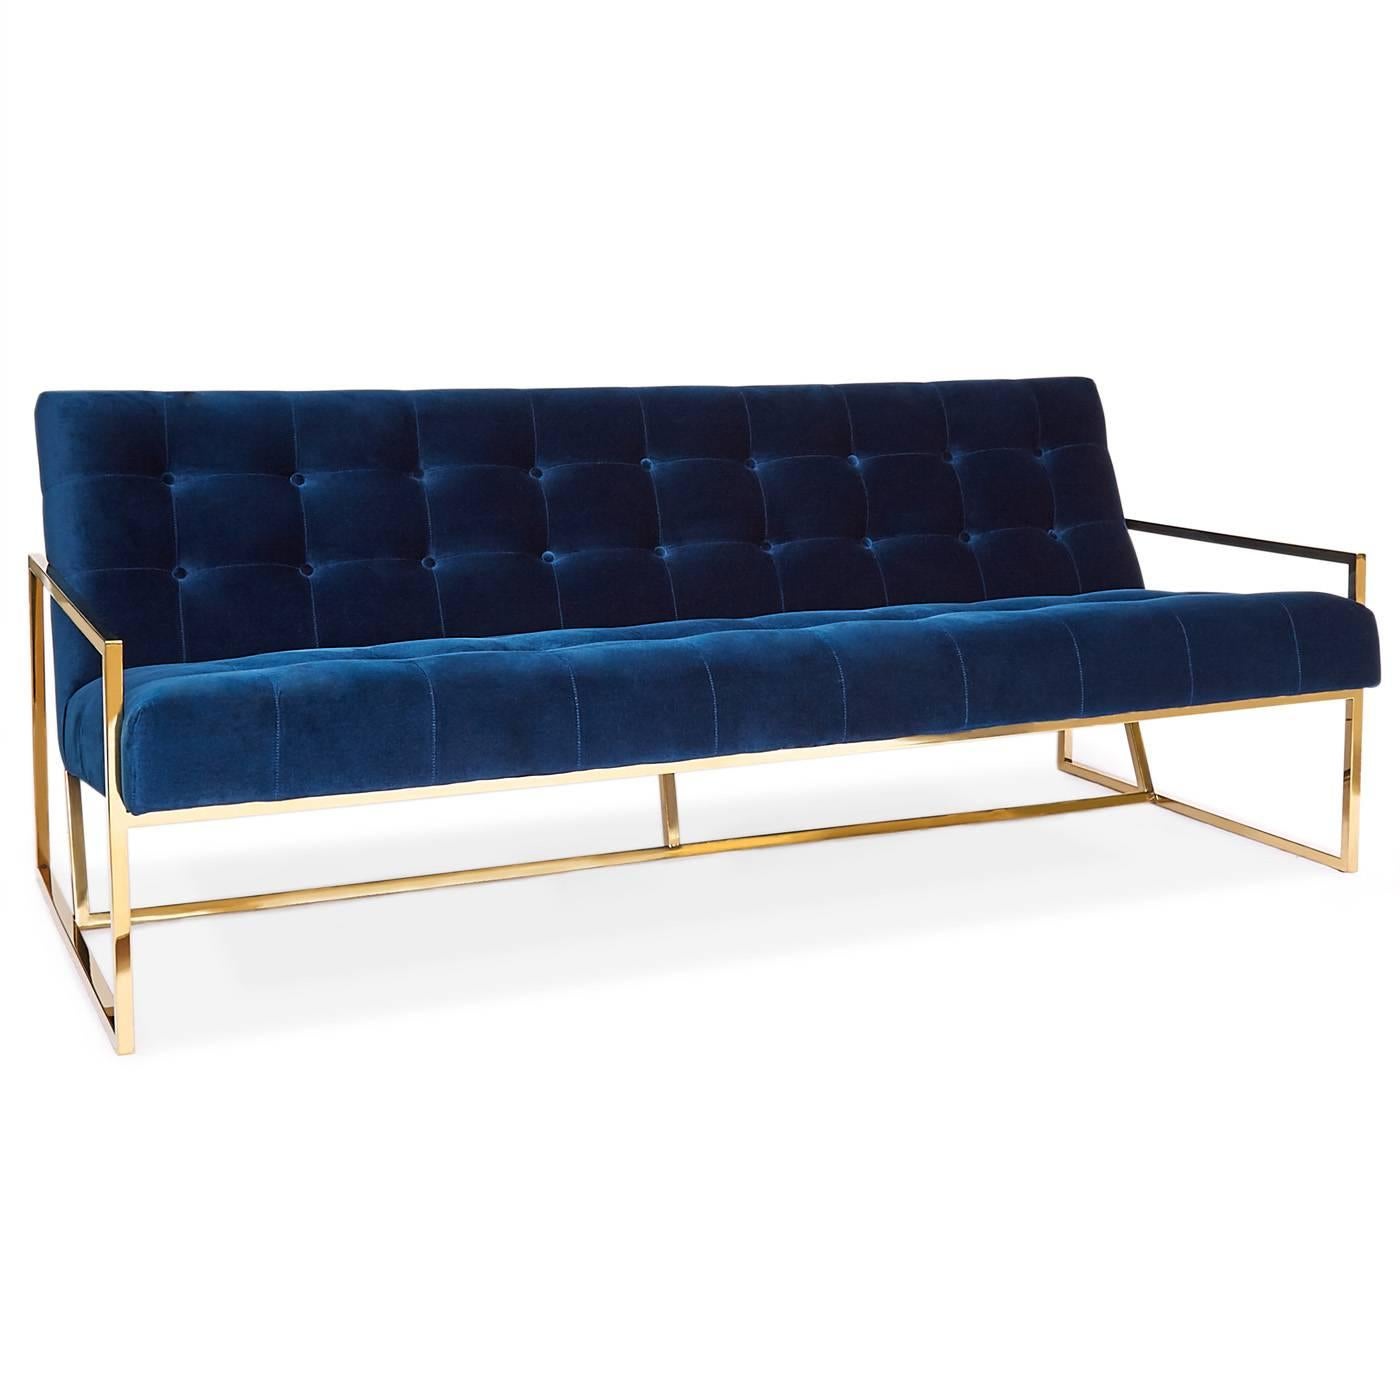 Minimalist Comfort. Pared down geometry in polished brass meets swanky navy velvet in our Goldfinger Apartment sofa. A little bit 1970s, a lot today. Goldfinger is the winning ticket that adds Modernist rigor to your Park Ave pad or swanks up your